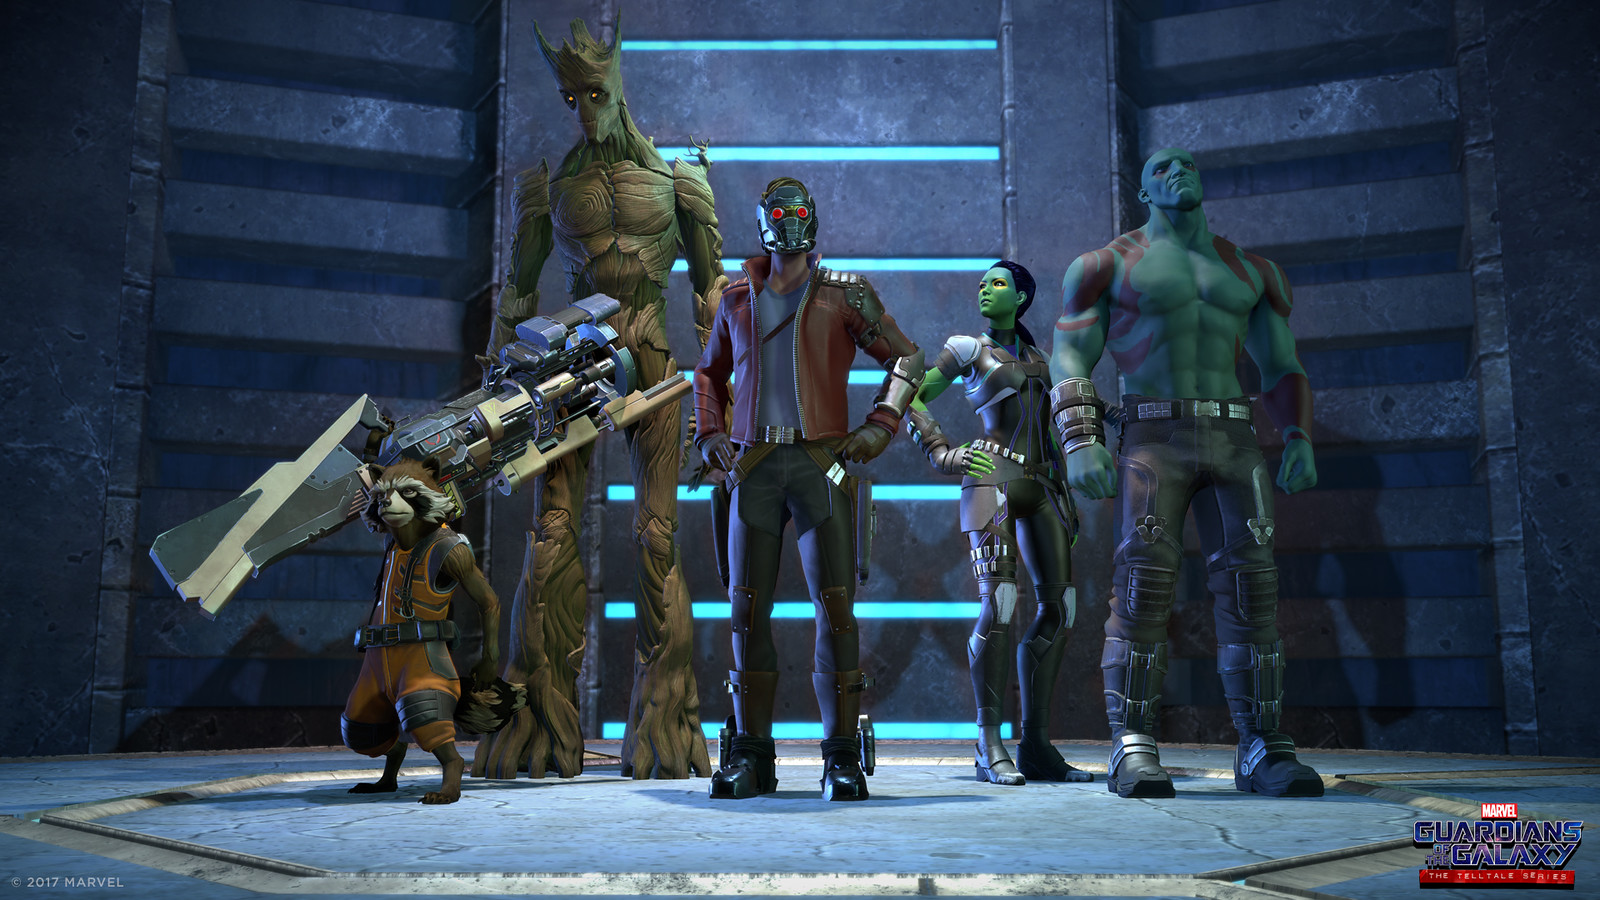 Telltale Games And Marvel Entertainment Reveal World-First Look & Cast Details For Marvel’s Guardians Of The Galaxy: The Telltale Series